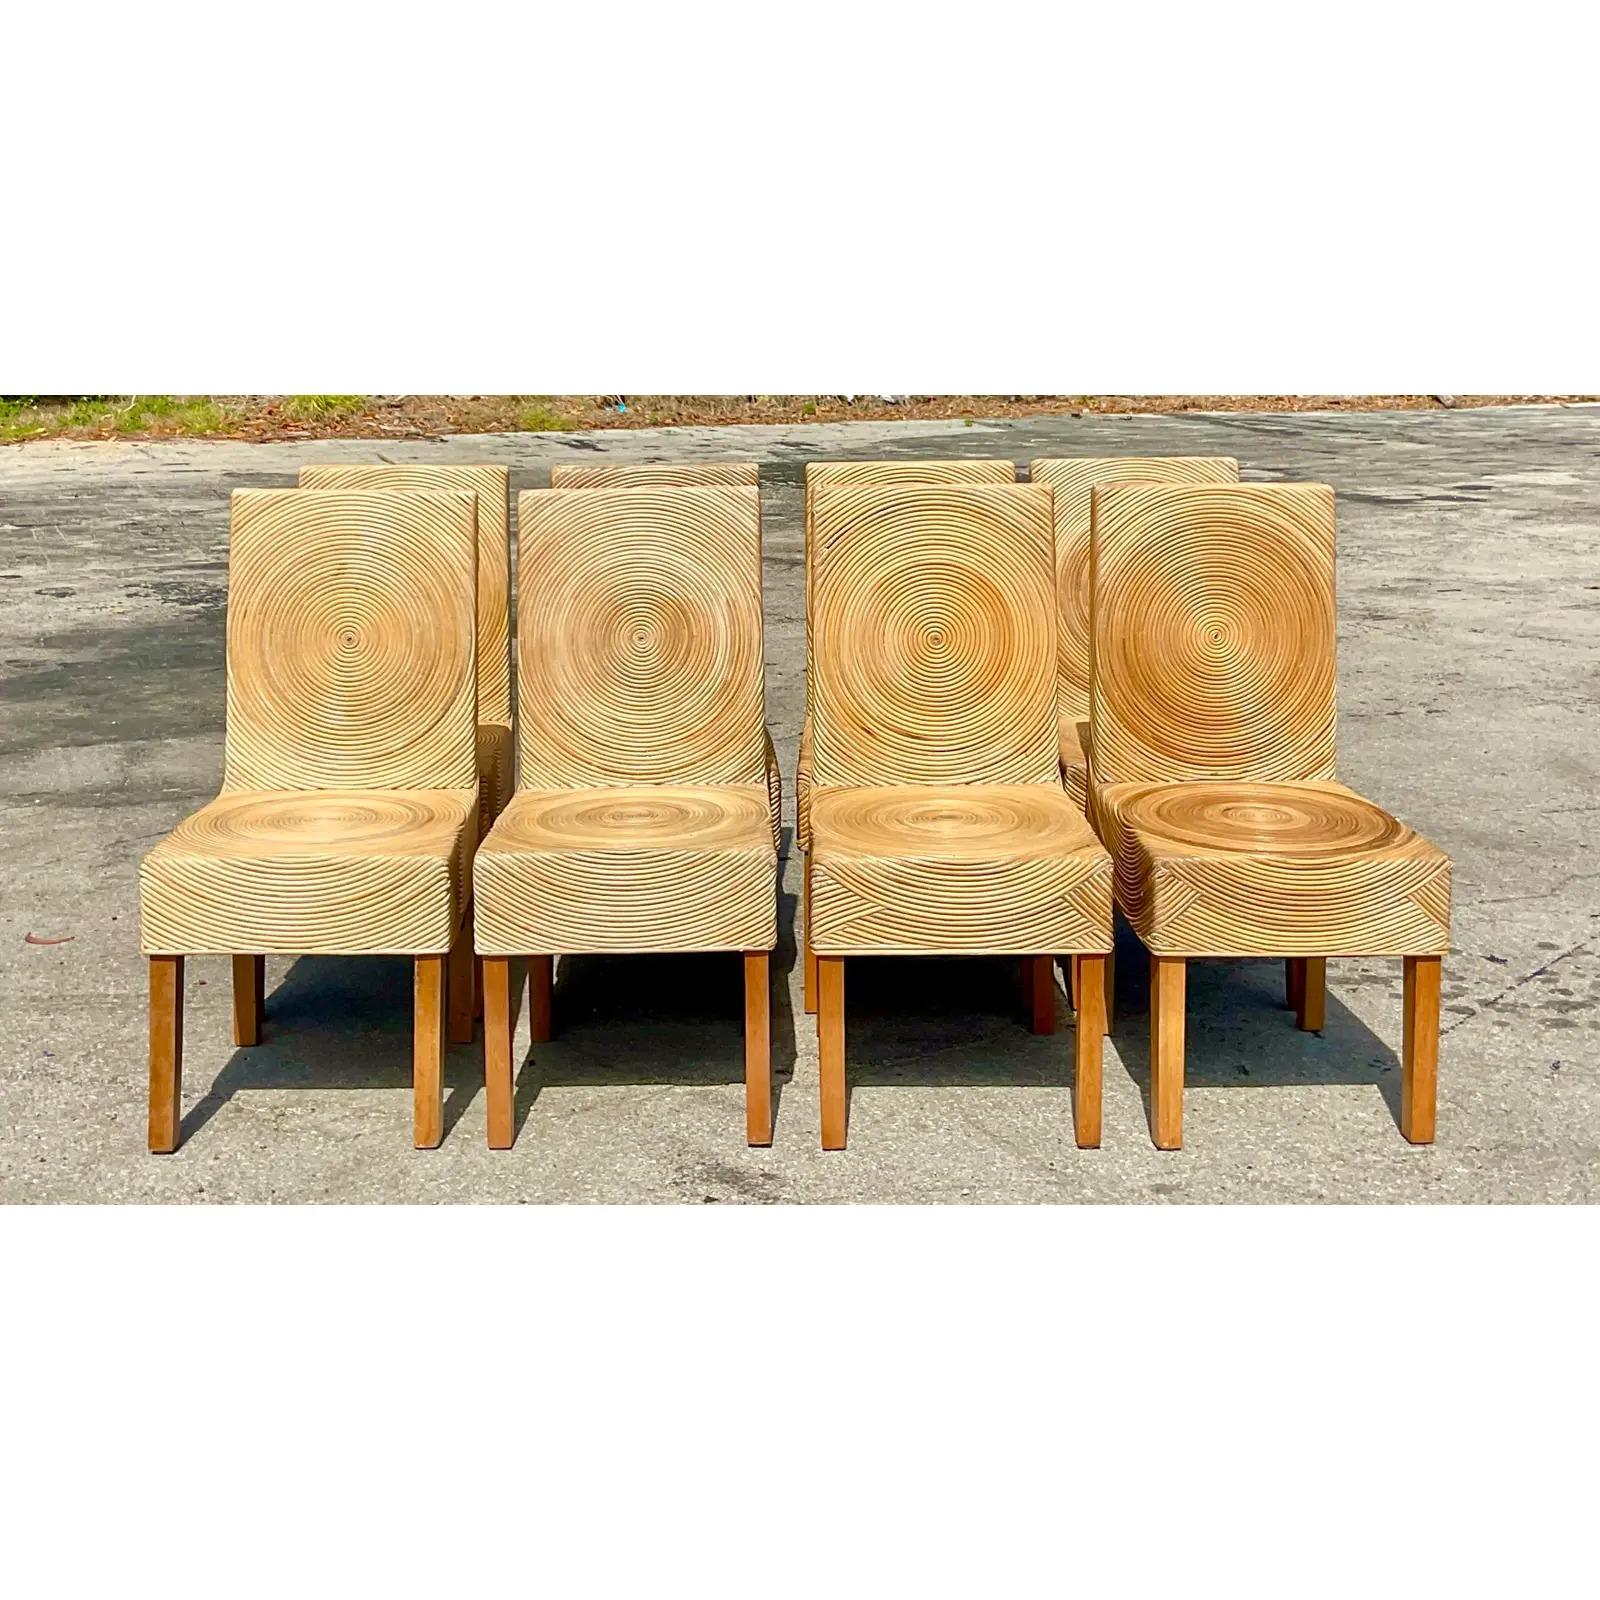 Vintage Coastal set of 8 pencil reed dining chairs. Iconic circular design with a pale reed finish. A really special and unique set. Acquired from a Palm Beach estate.